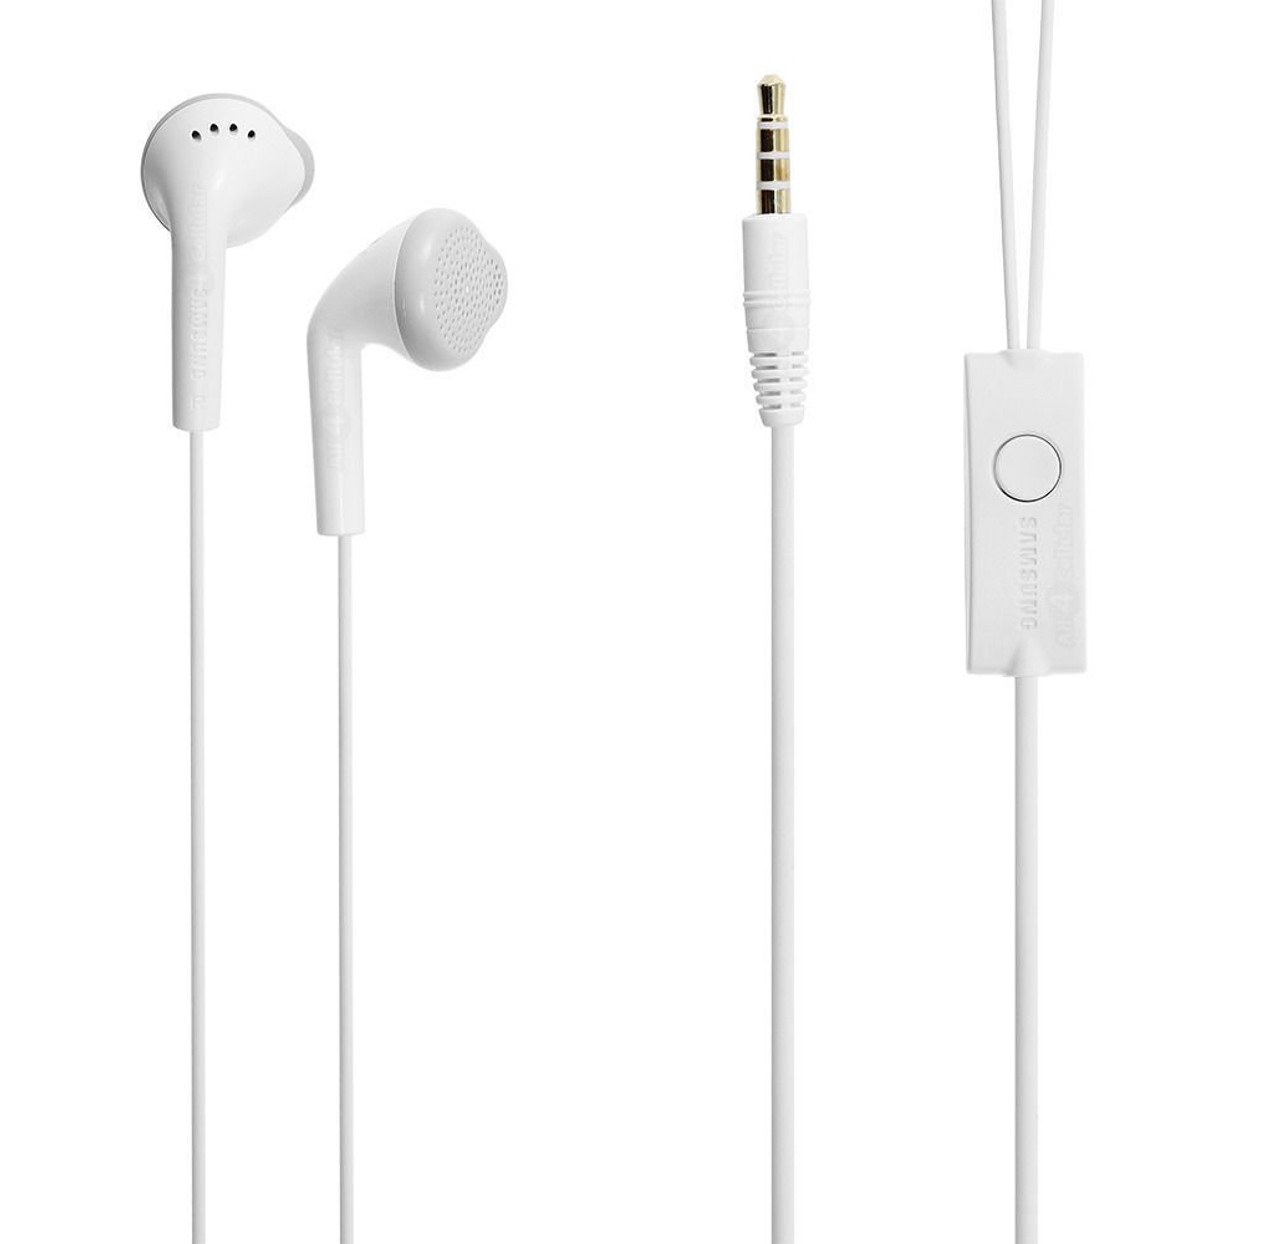 Samsung Galaxy Stereo Headsets (2 Pack) product image